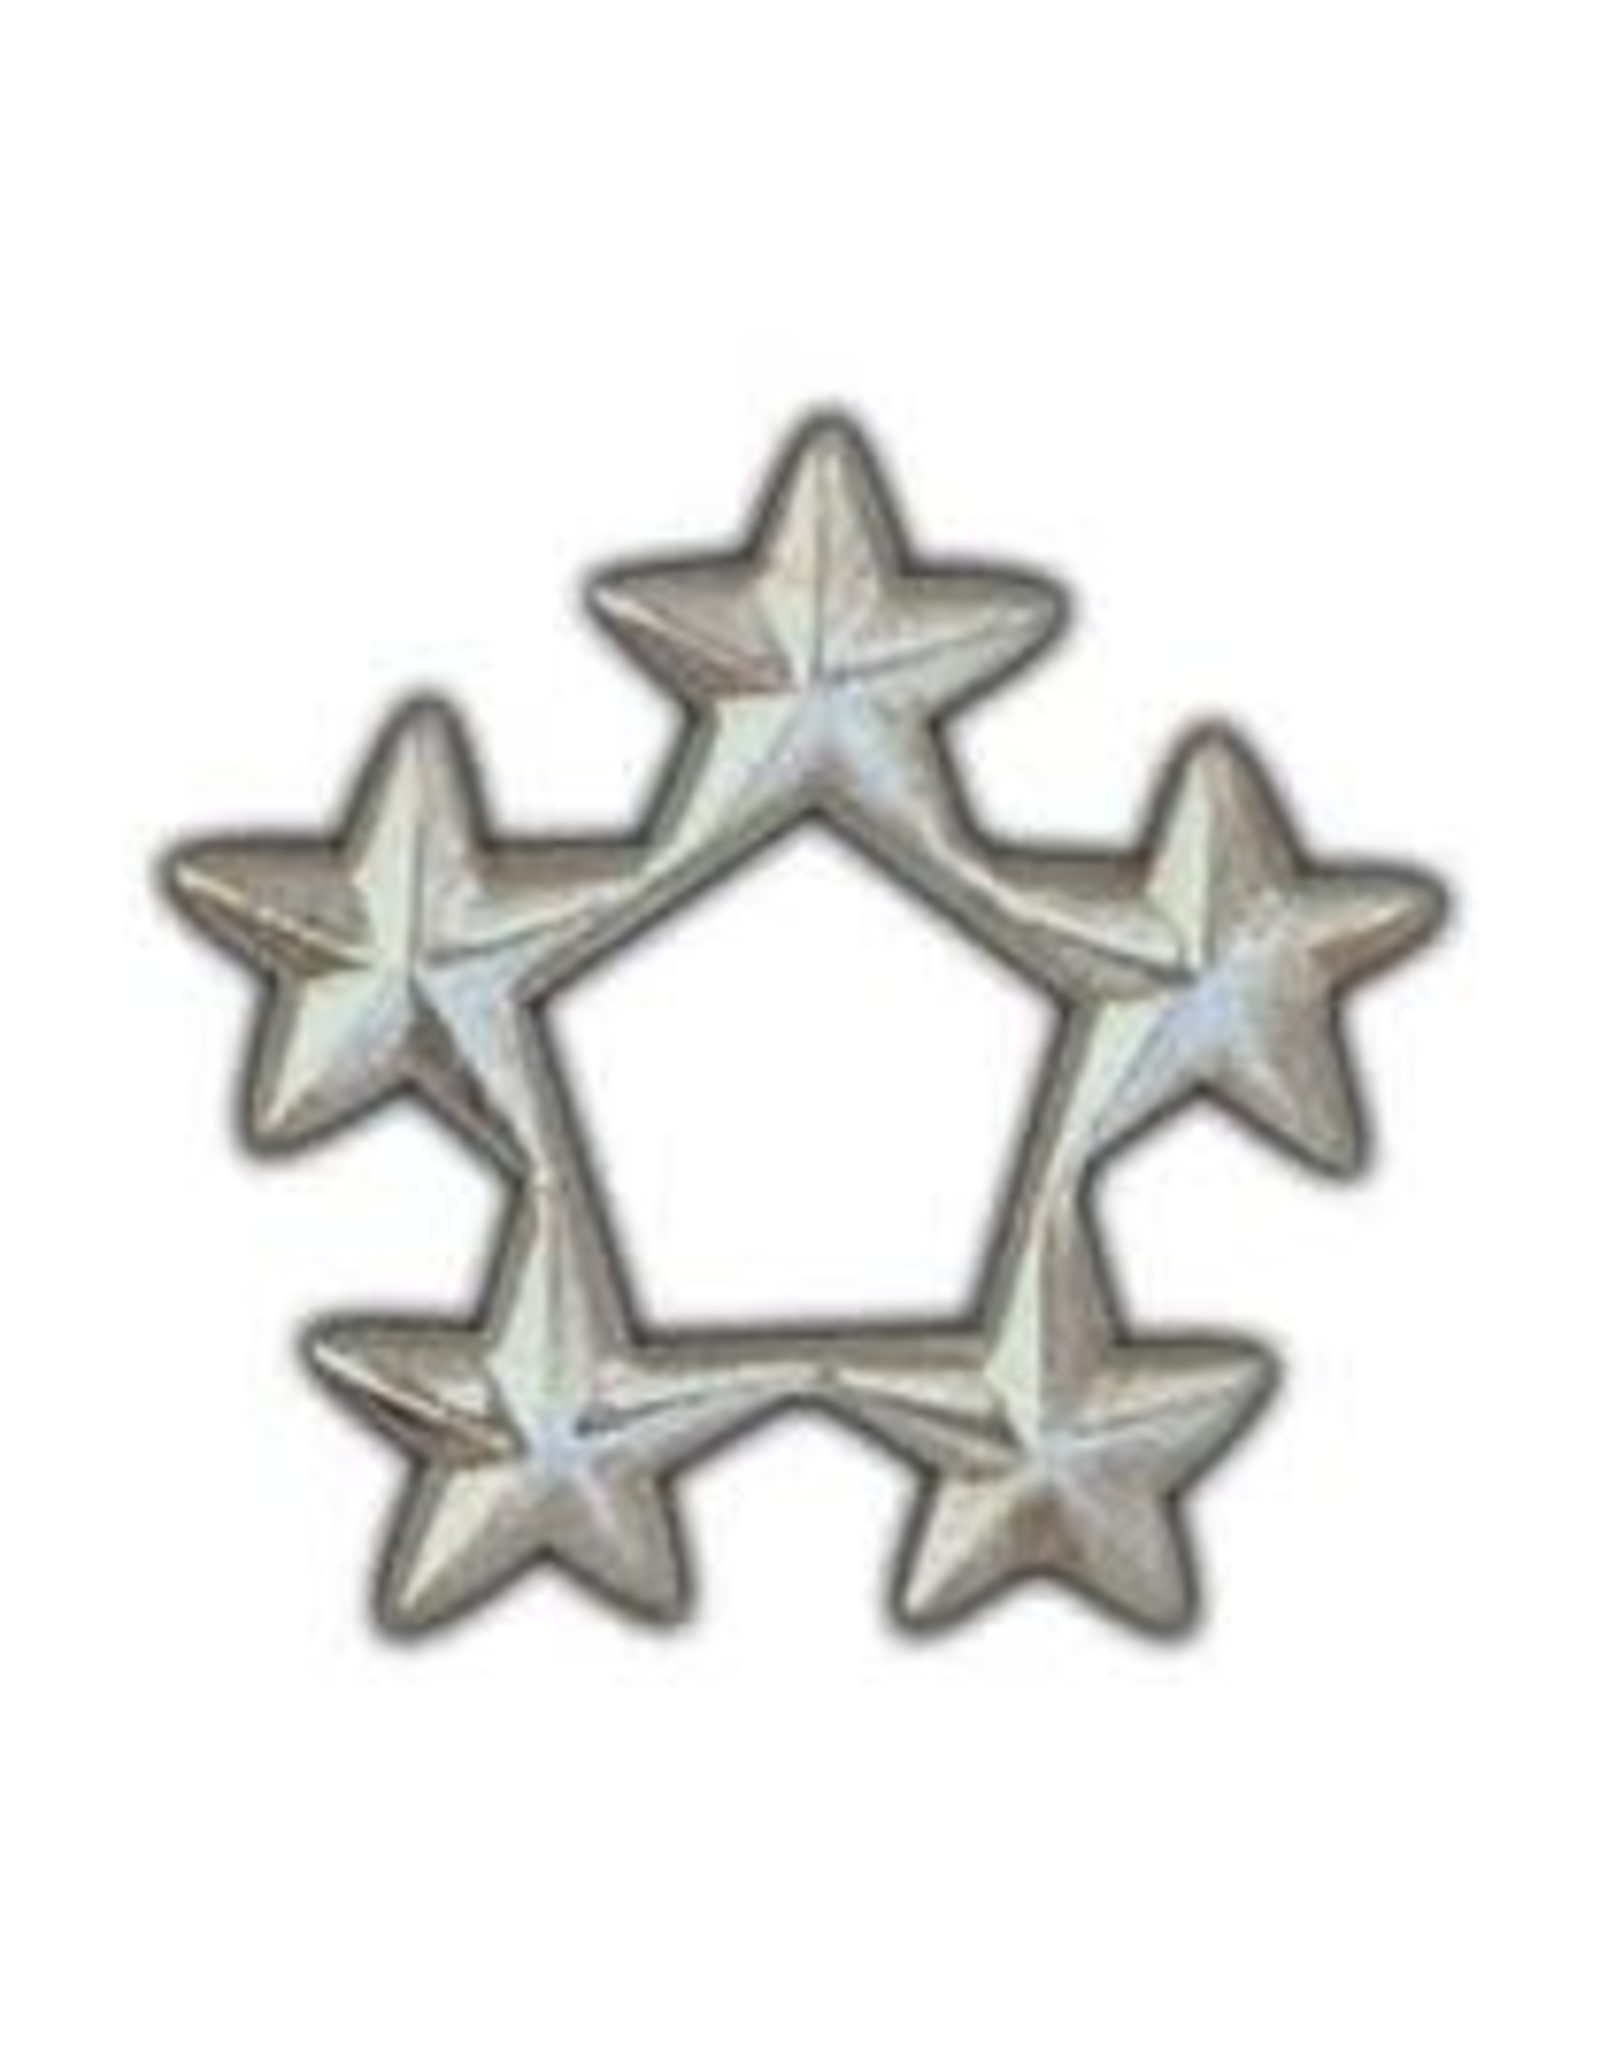 Pin - Army General Star A5 Silver, 7/16" Stars